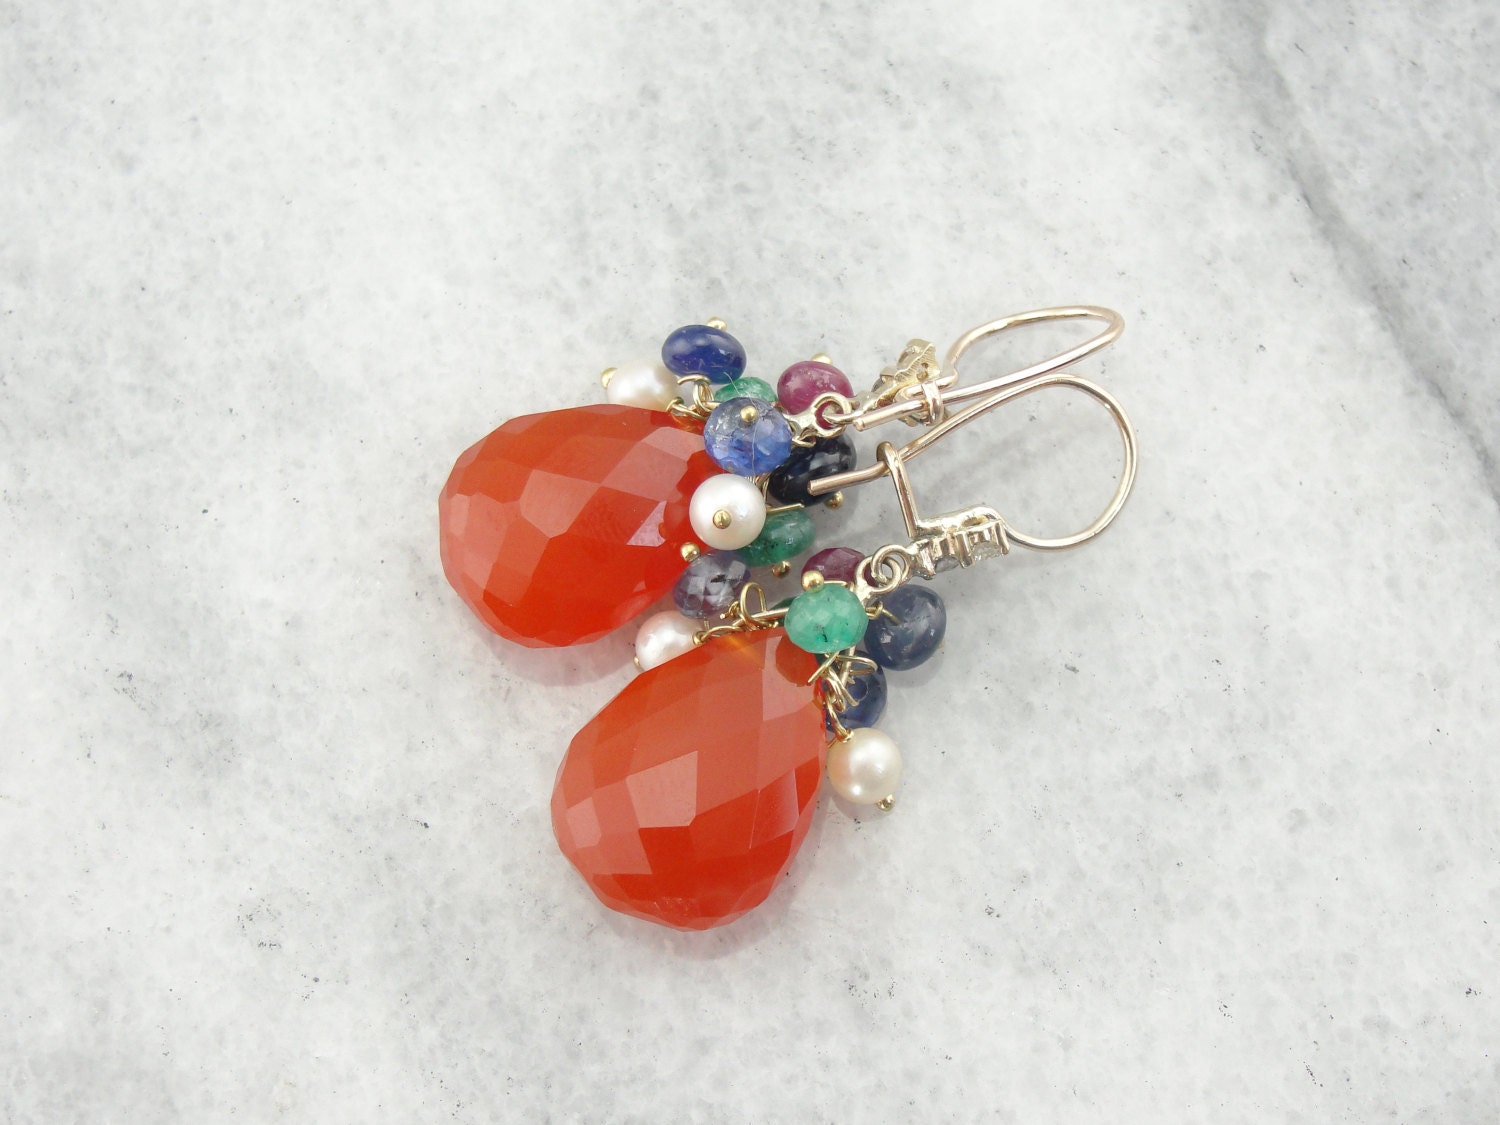 Fun Carnelian Drop Earrings With Diamond and Gemstone Accents | Etsy